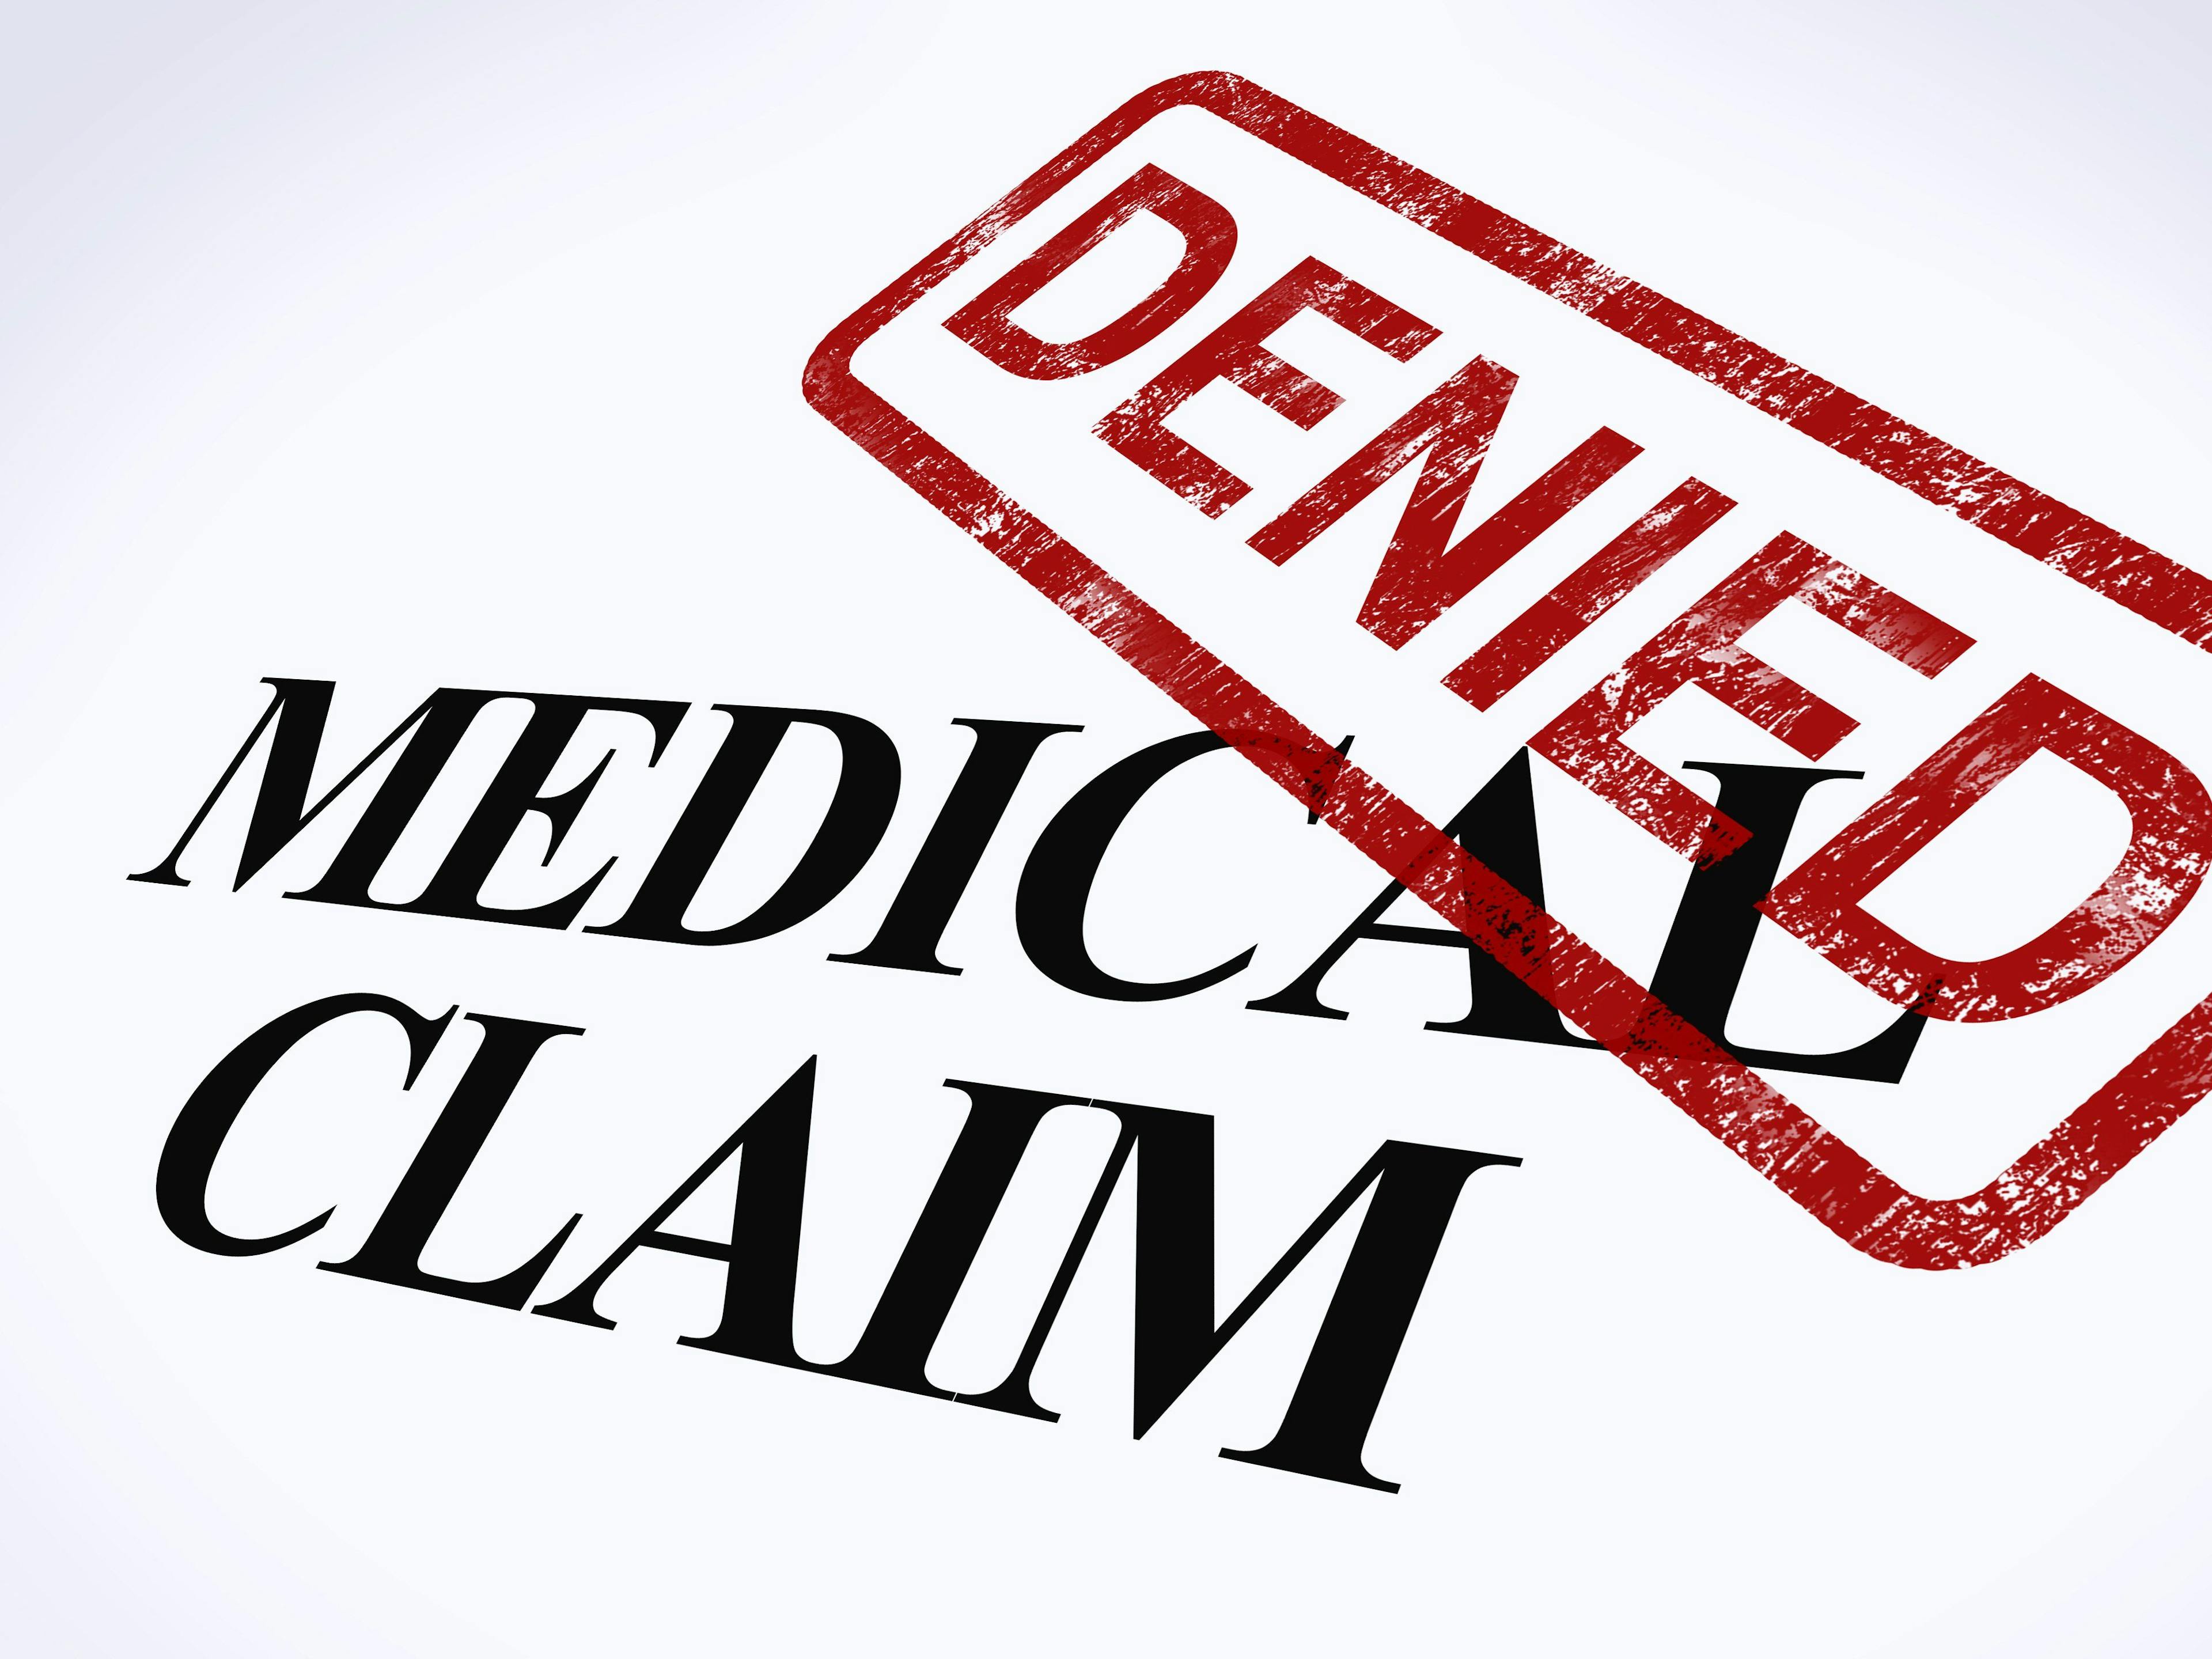 denied claims, resumbitting claims, physician practice, appeals, medical billing